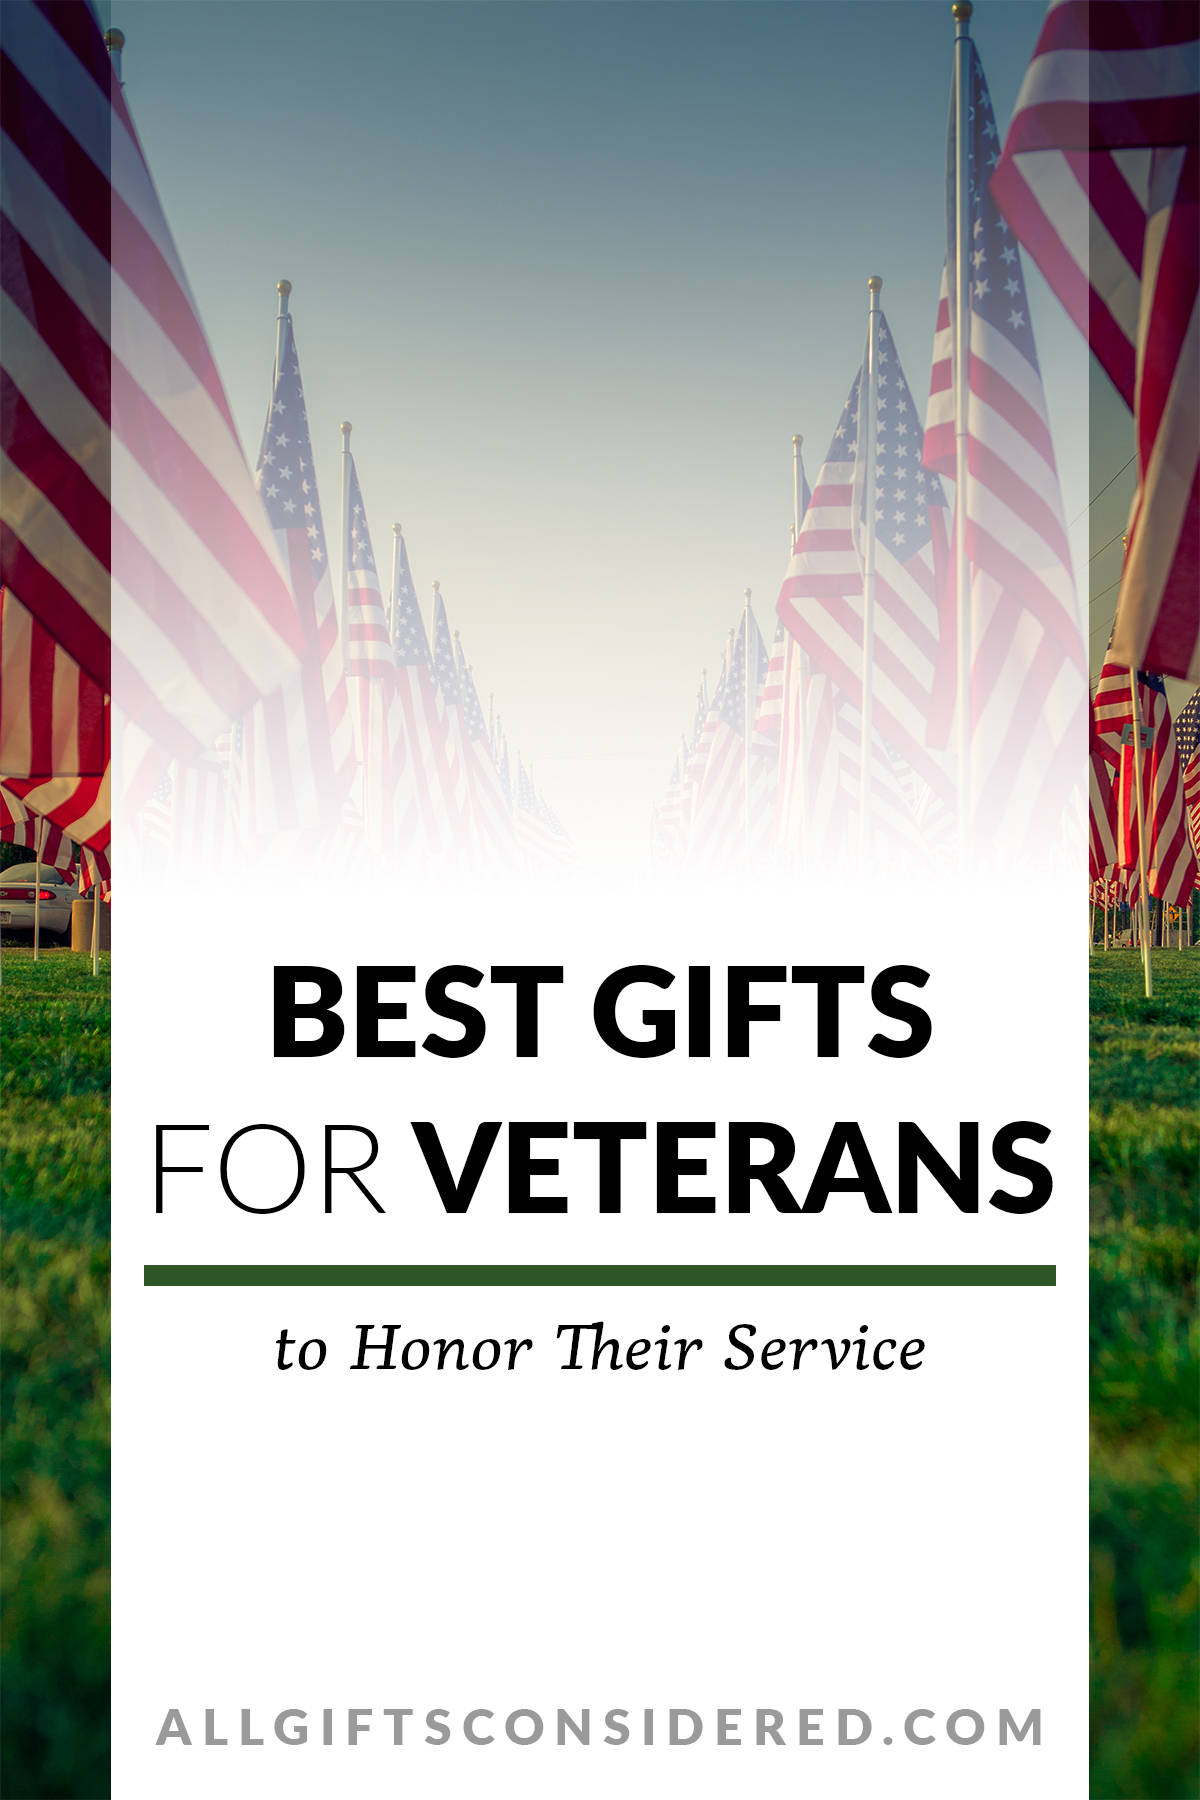 Gifts for Veterans - feature image